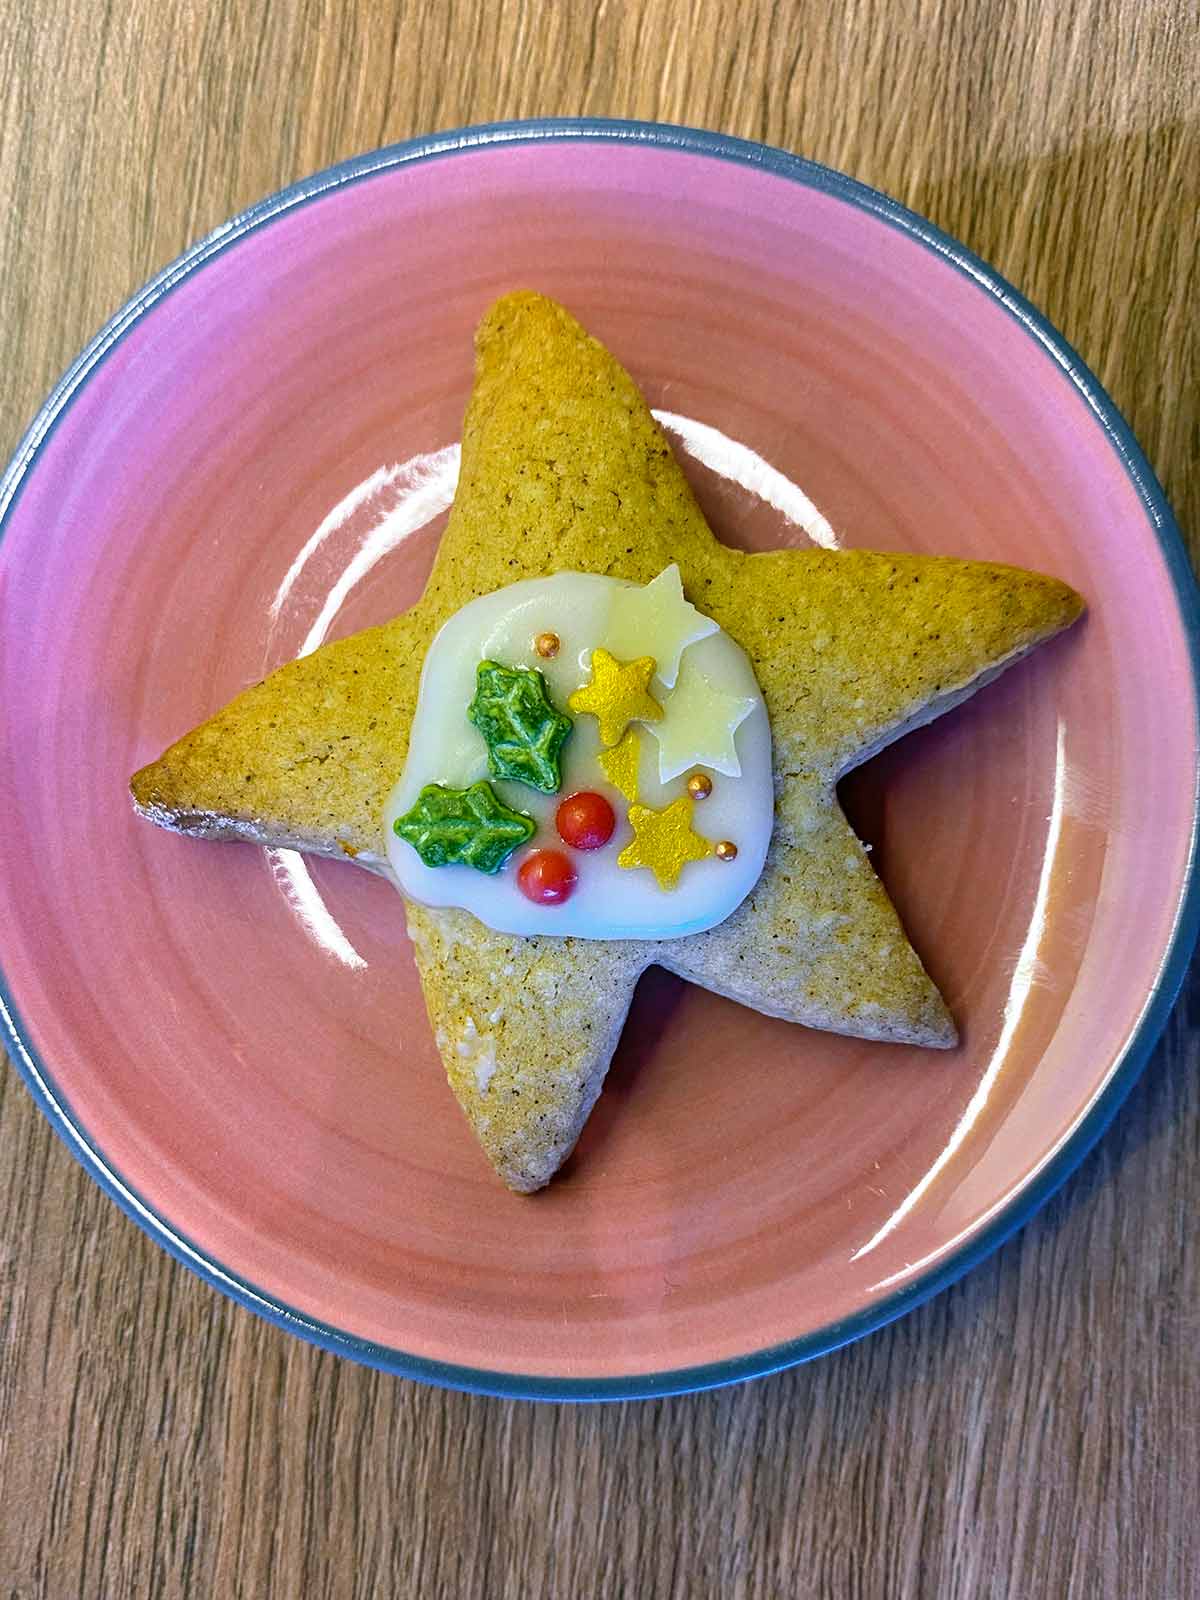 A star shaped biscuit decorated with icing and festive sprinkles.